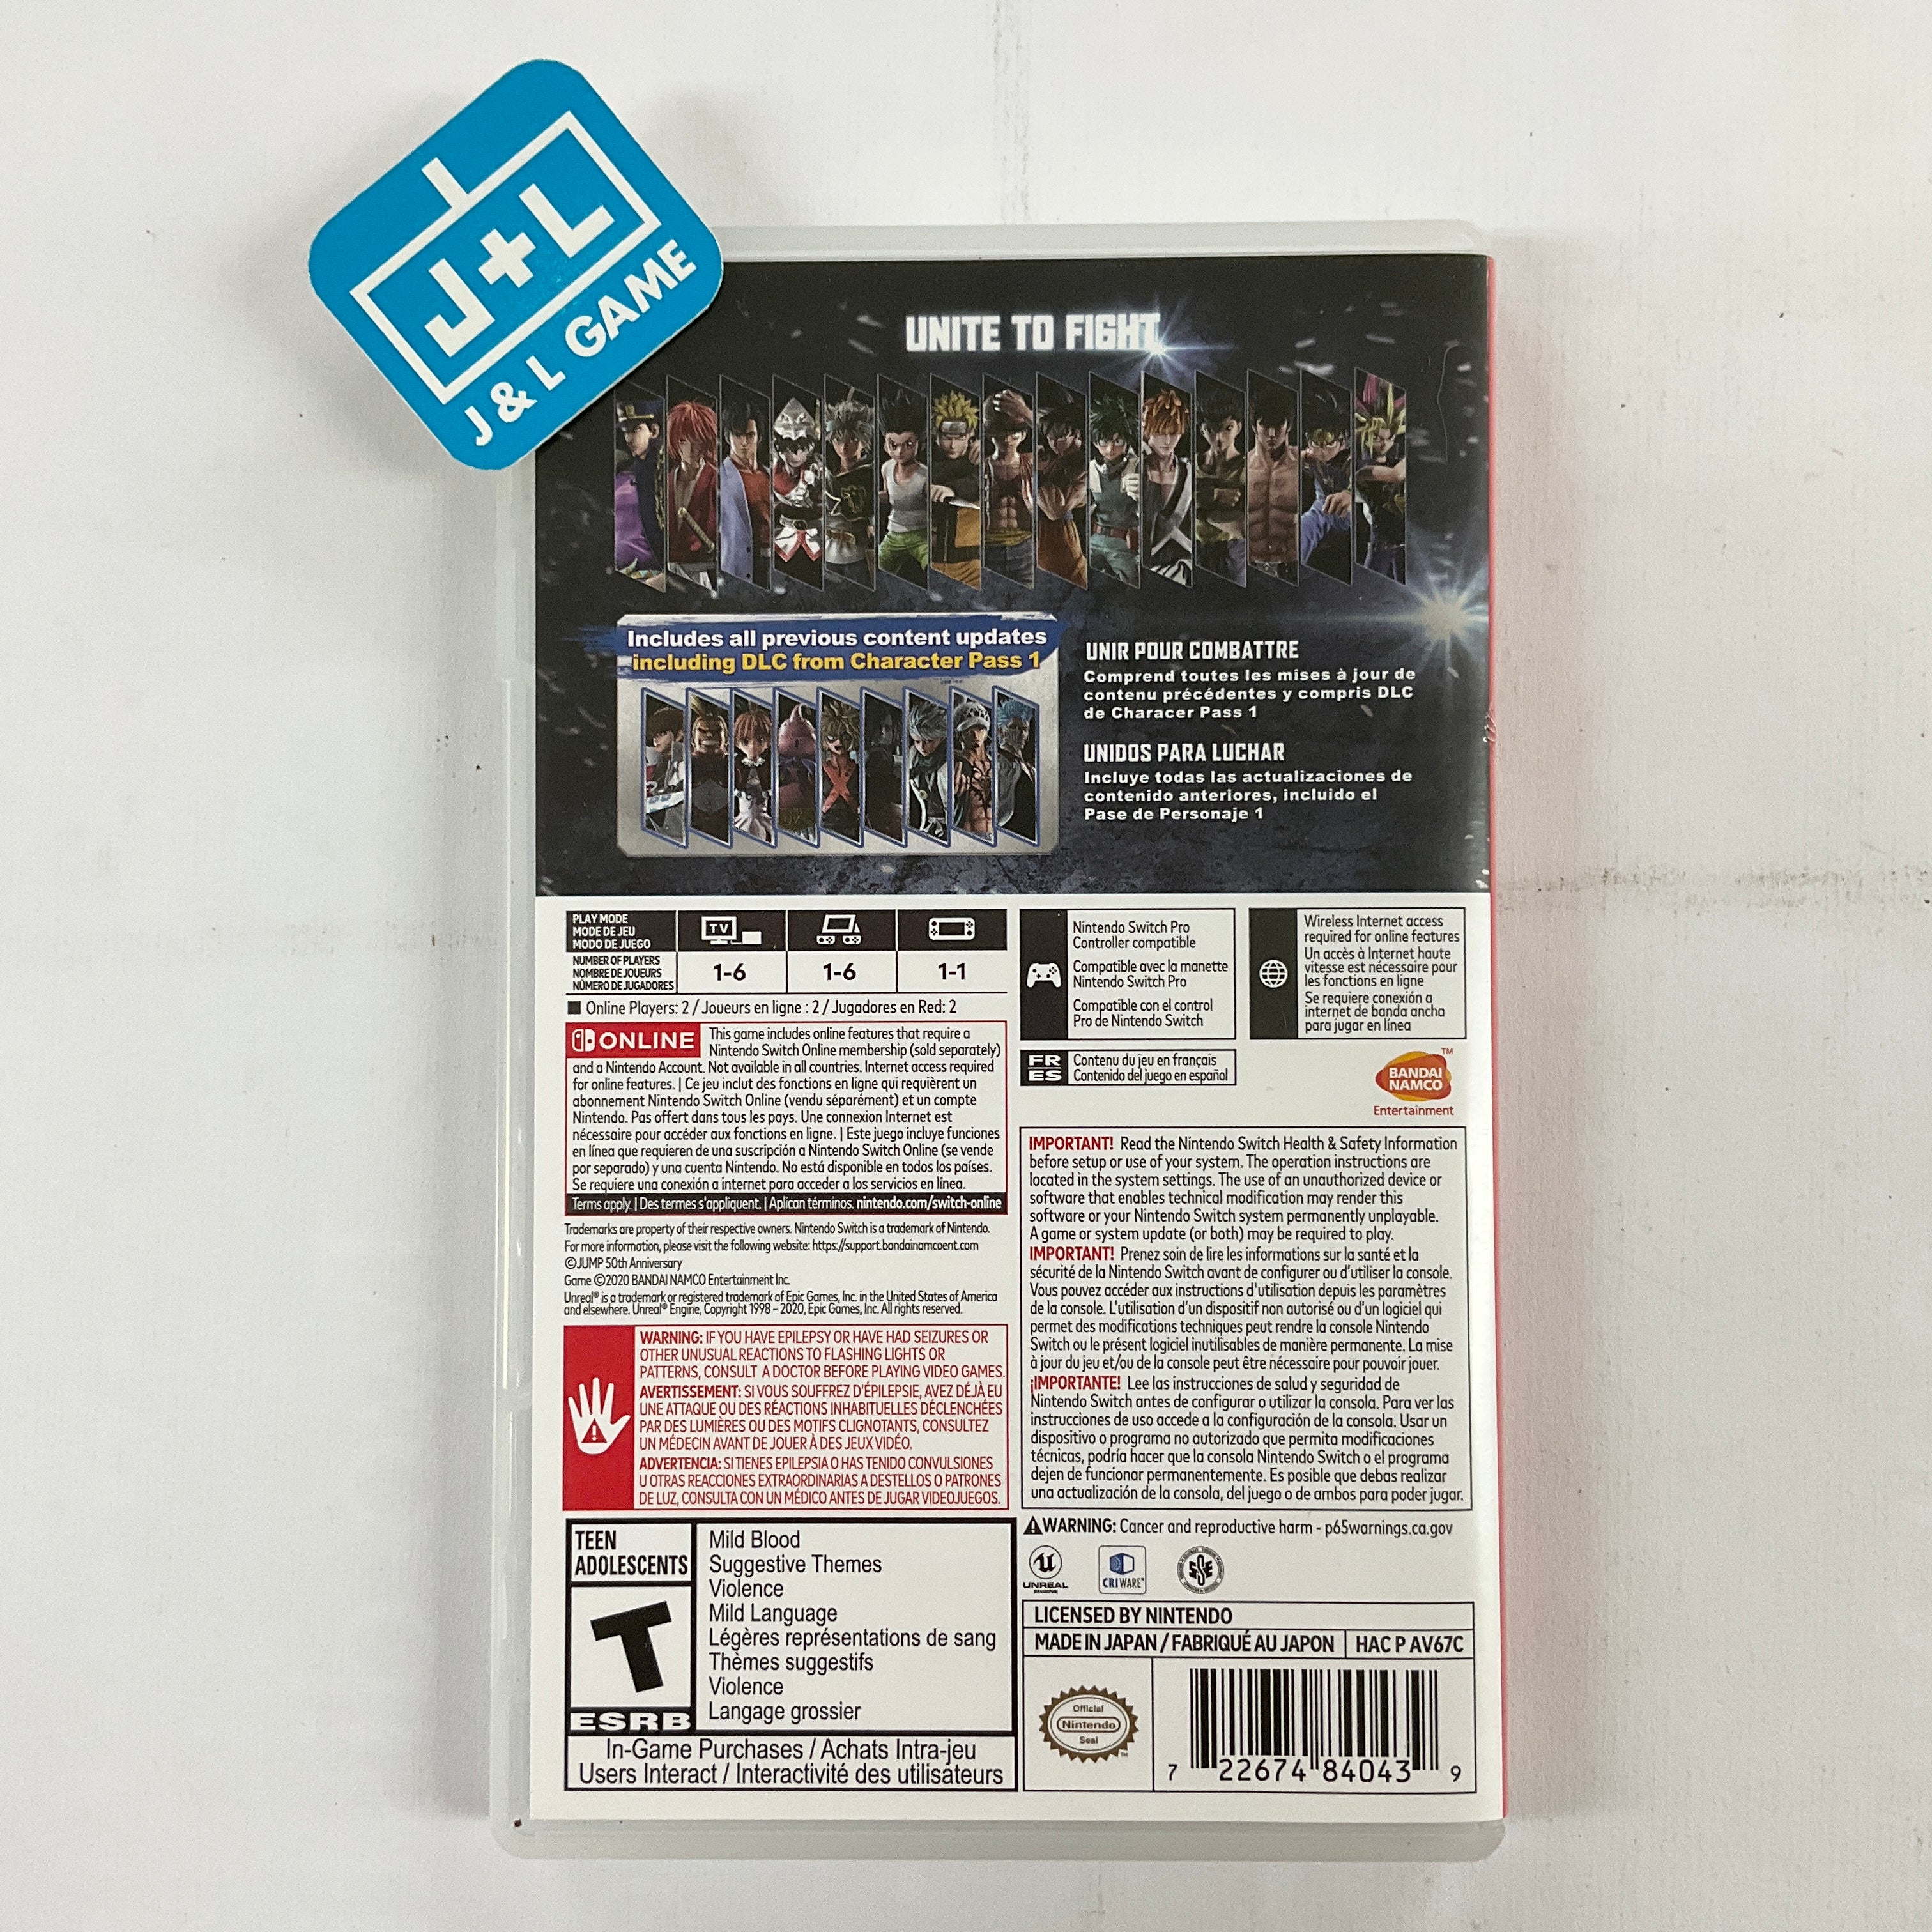 Jump Force Deluxe Edition - (NSW) Nintendo Switch [Pre-Owned] Video Games BANDAI NAMCO Entertainment   